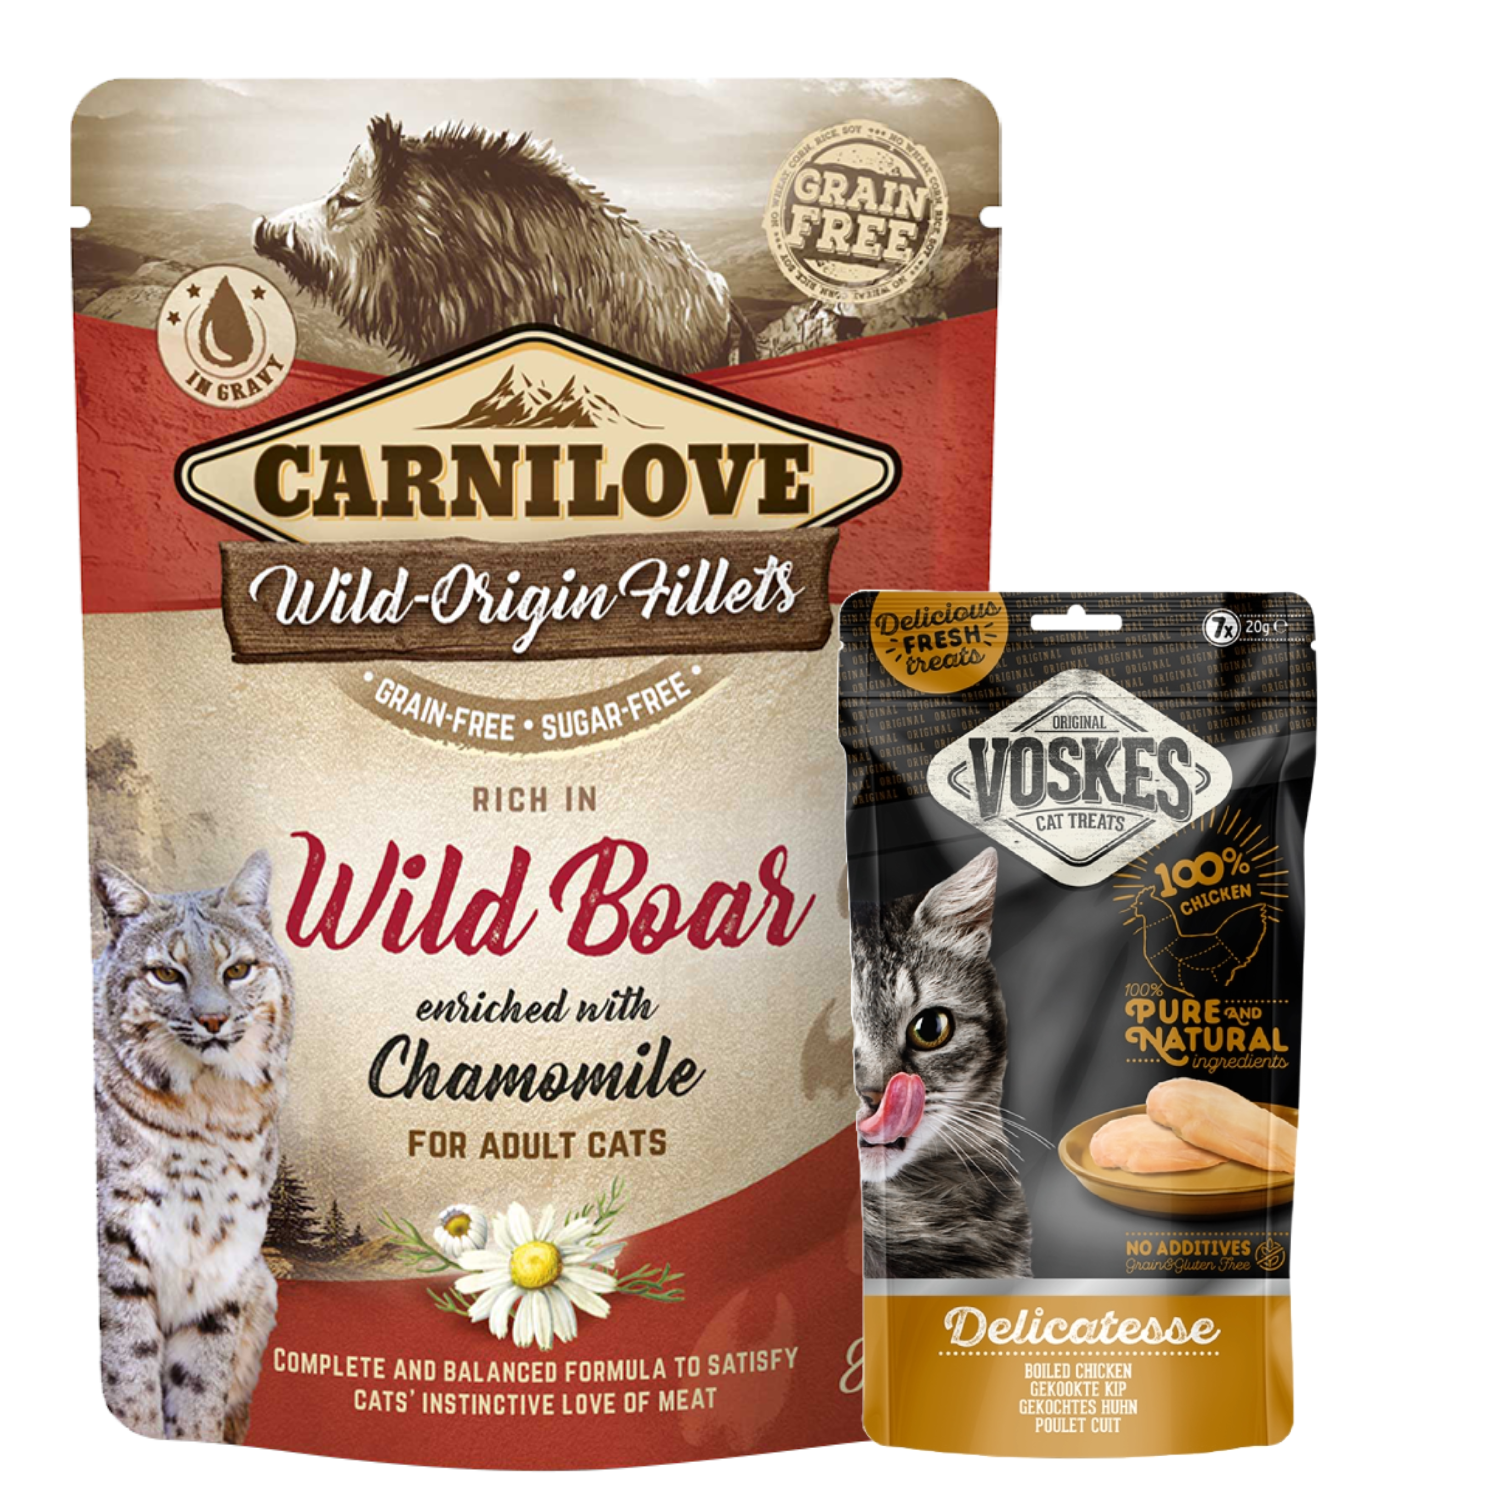 Carnilove Wild Boar enriched with Chamomile for Adult Cats  and Voskes Delicatesse Boiled Chicken for Cats Bundle